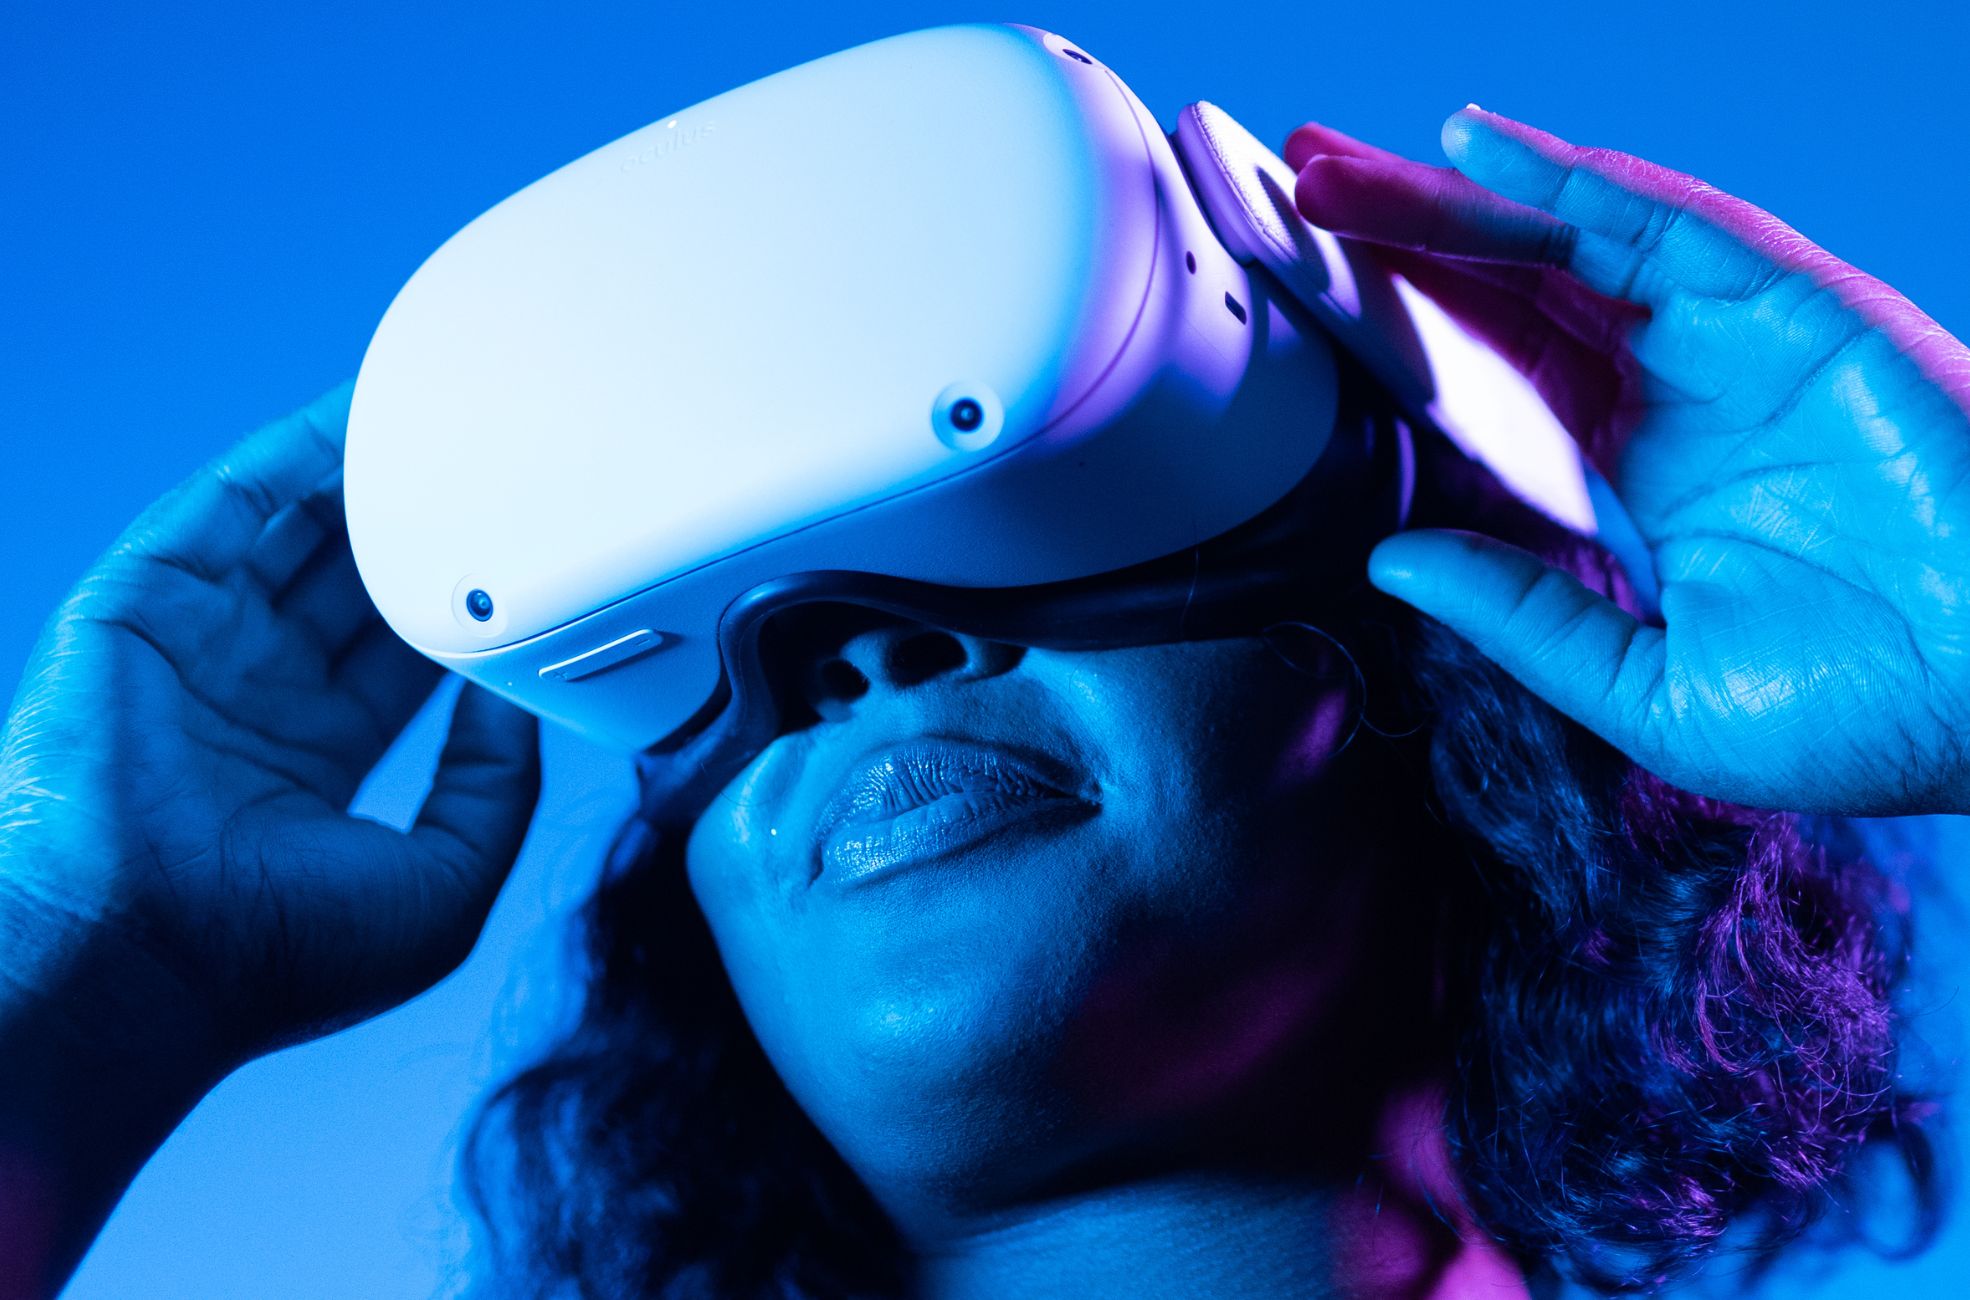 Woman Using VR Headset For An Interactive Game